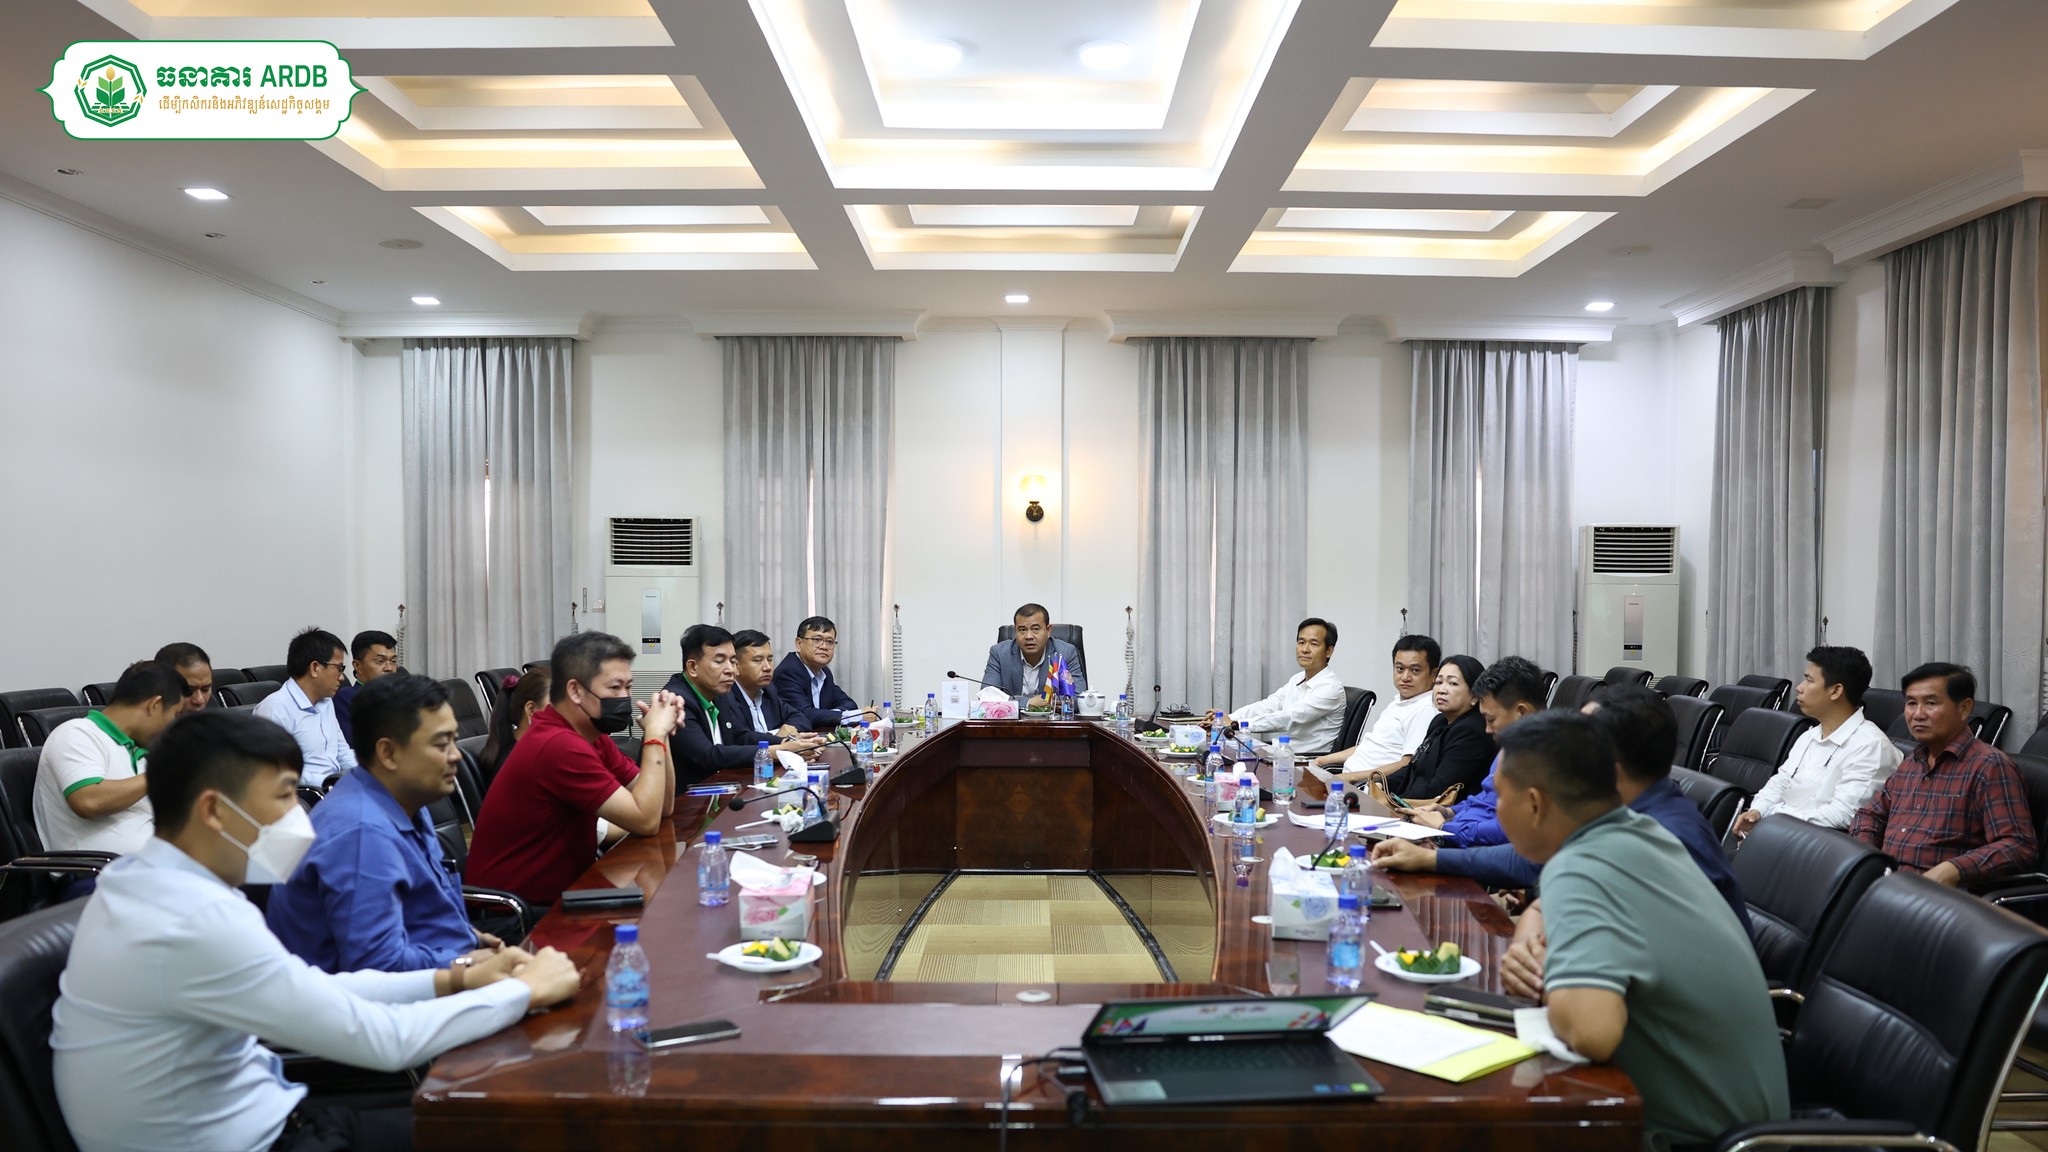 H.E. Dr. KAO Thach accompanied by DCEO and colleagues, has lead an emergency meeting with representaive of Cambodia Rice Federation, Rice Millers, and Rice Exporters